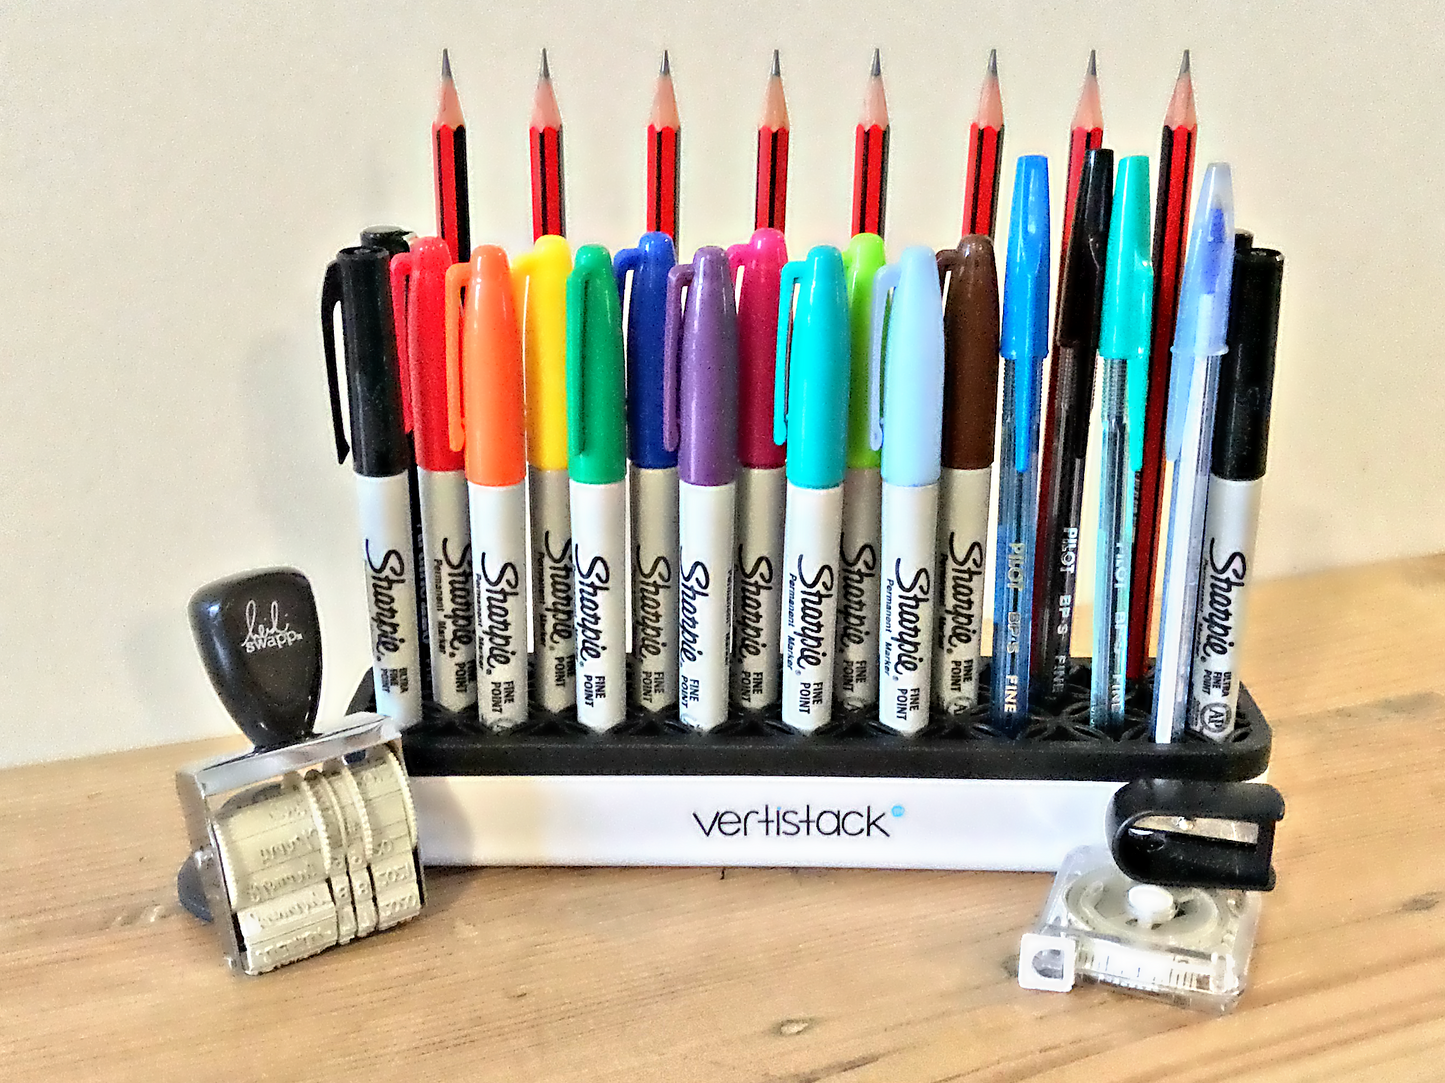 Vertistack® (Price excludes Shipping)